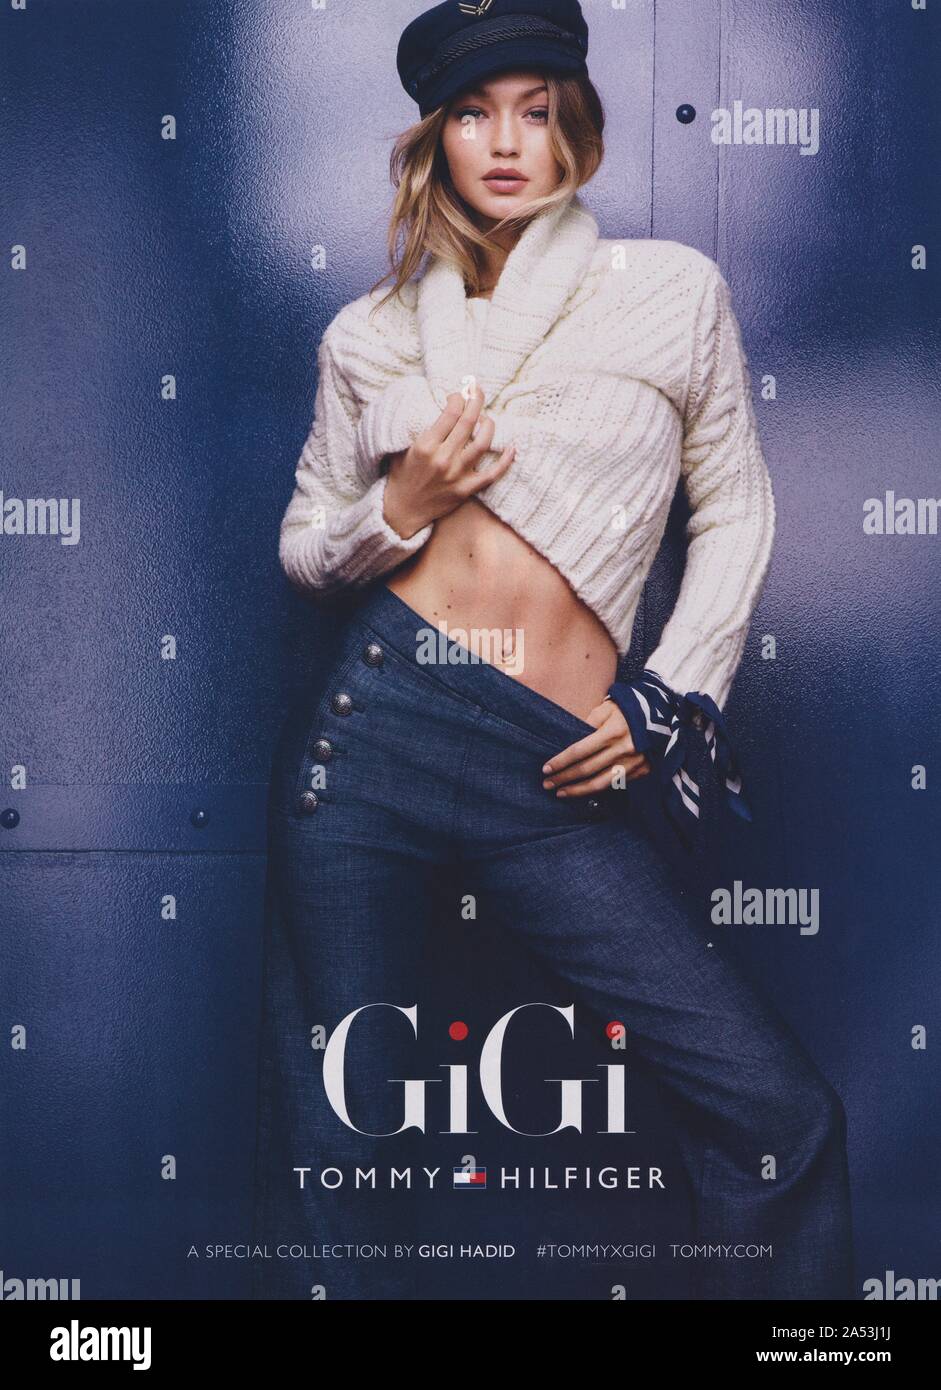 poster advertising Tommy Hilfiger fashion house with Gigi Hadid in paper  magazine from 2016 year, advertisement, creative Tommy Hilfiger 2010s  advert Stock Photo - Alamy